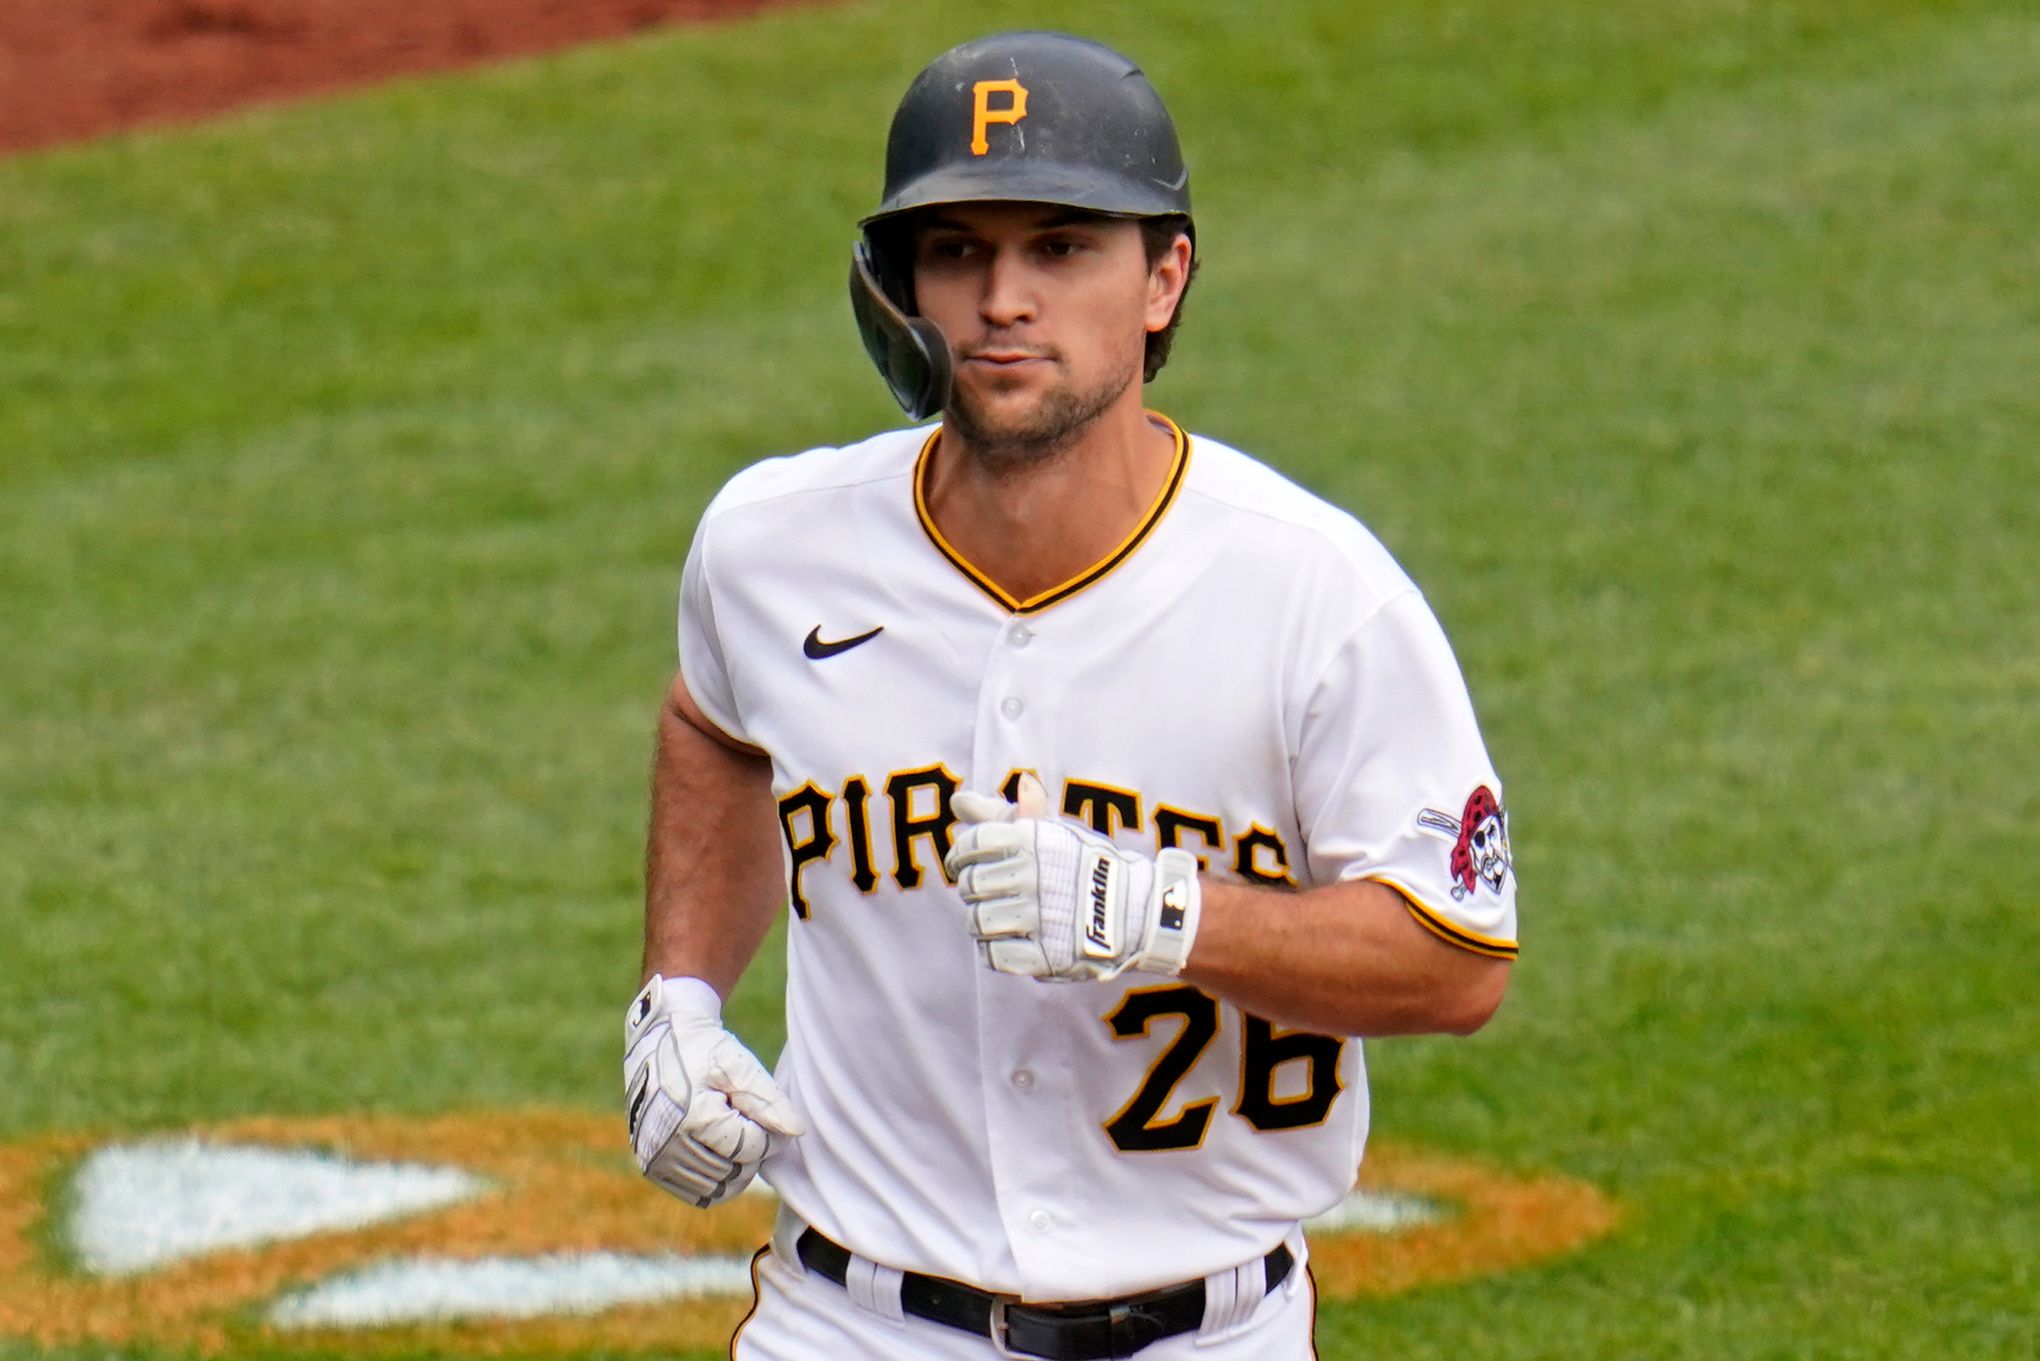 Pittsburgh Pirates 2B Adam Frazier is great fit for New York